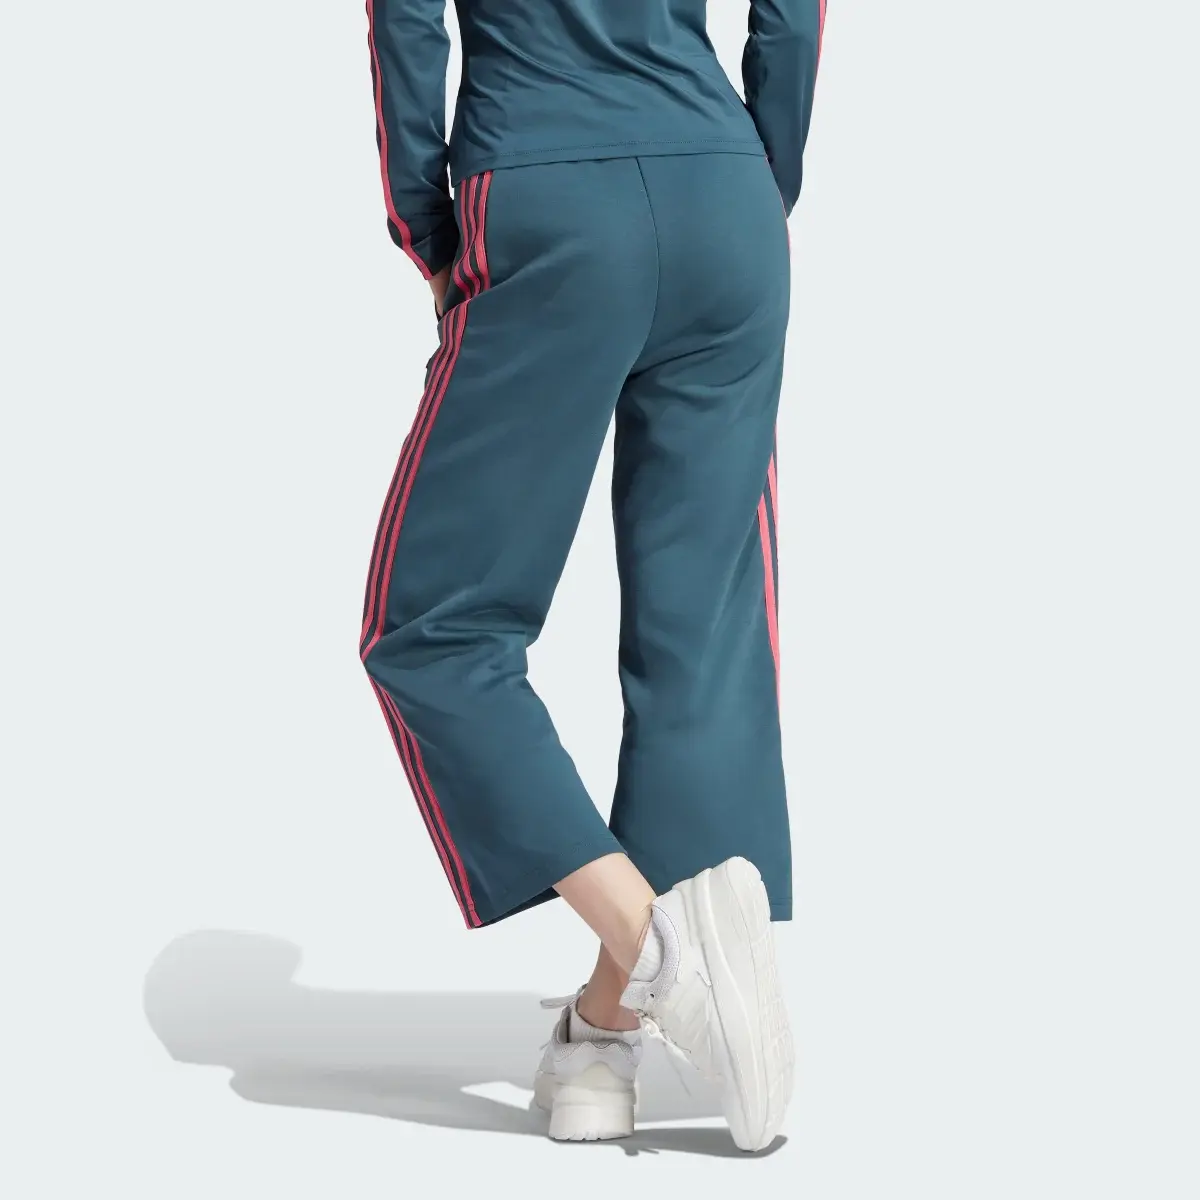 Adidas Future Icons 3-Stripes Tracksuit Bottoms. 2